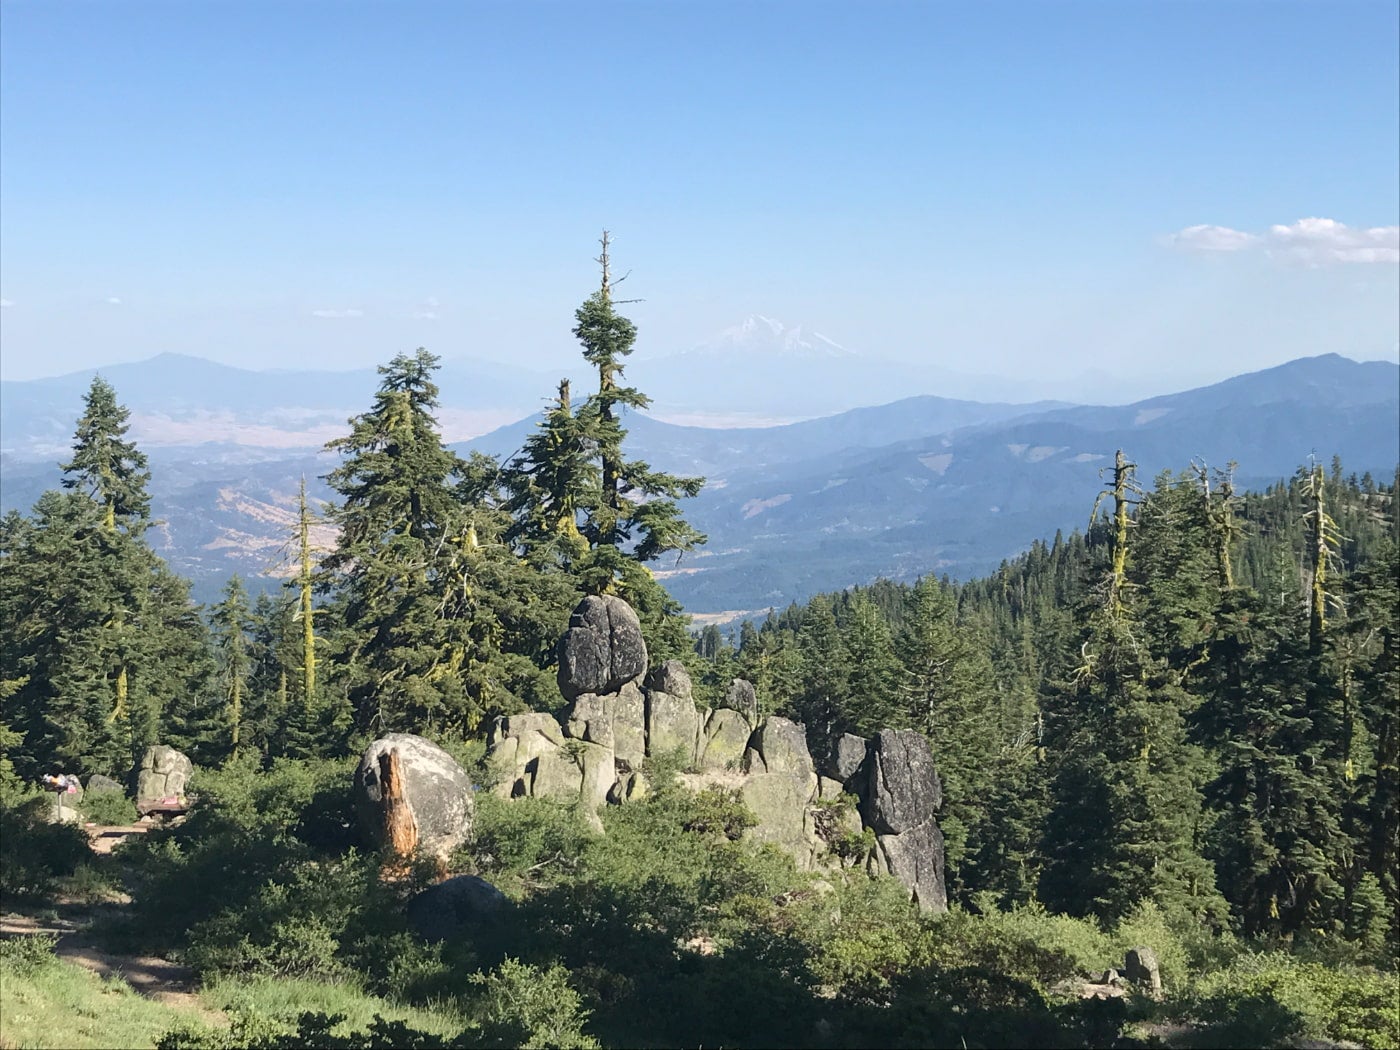 A stack of rocks on a hill covered in evergreens, in the distance is faint outline of Mount Shasta in southern oregon